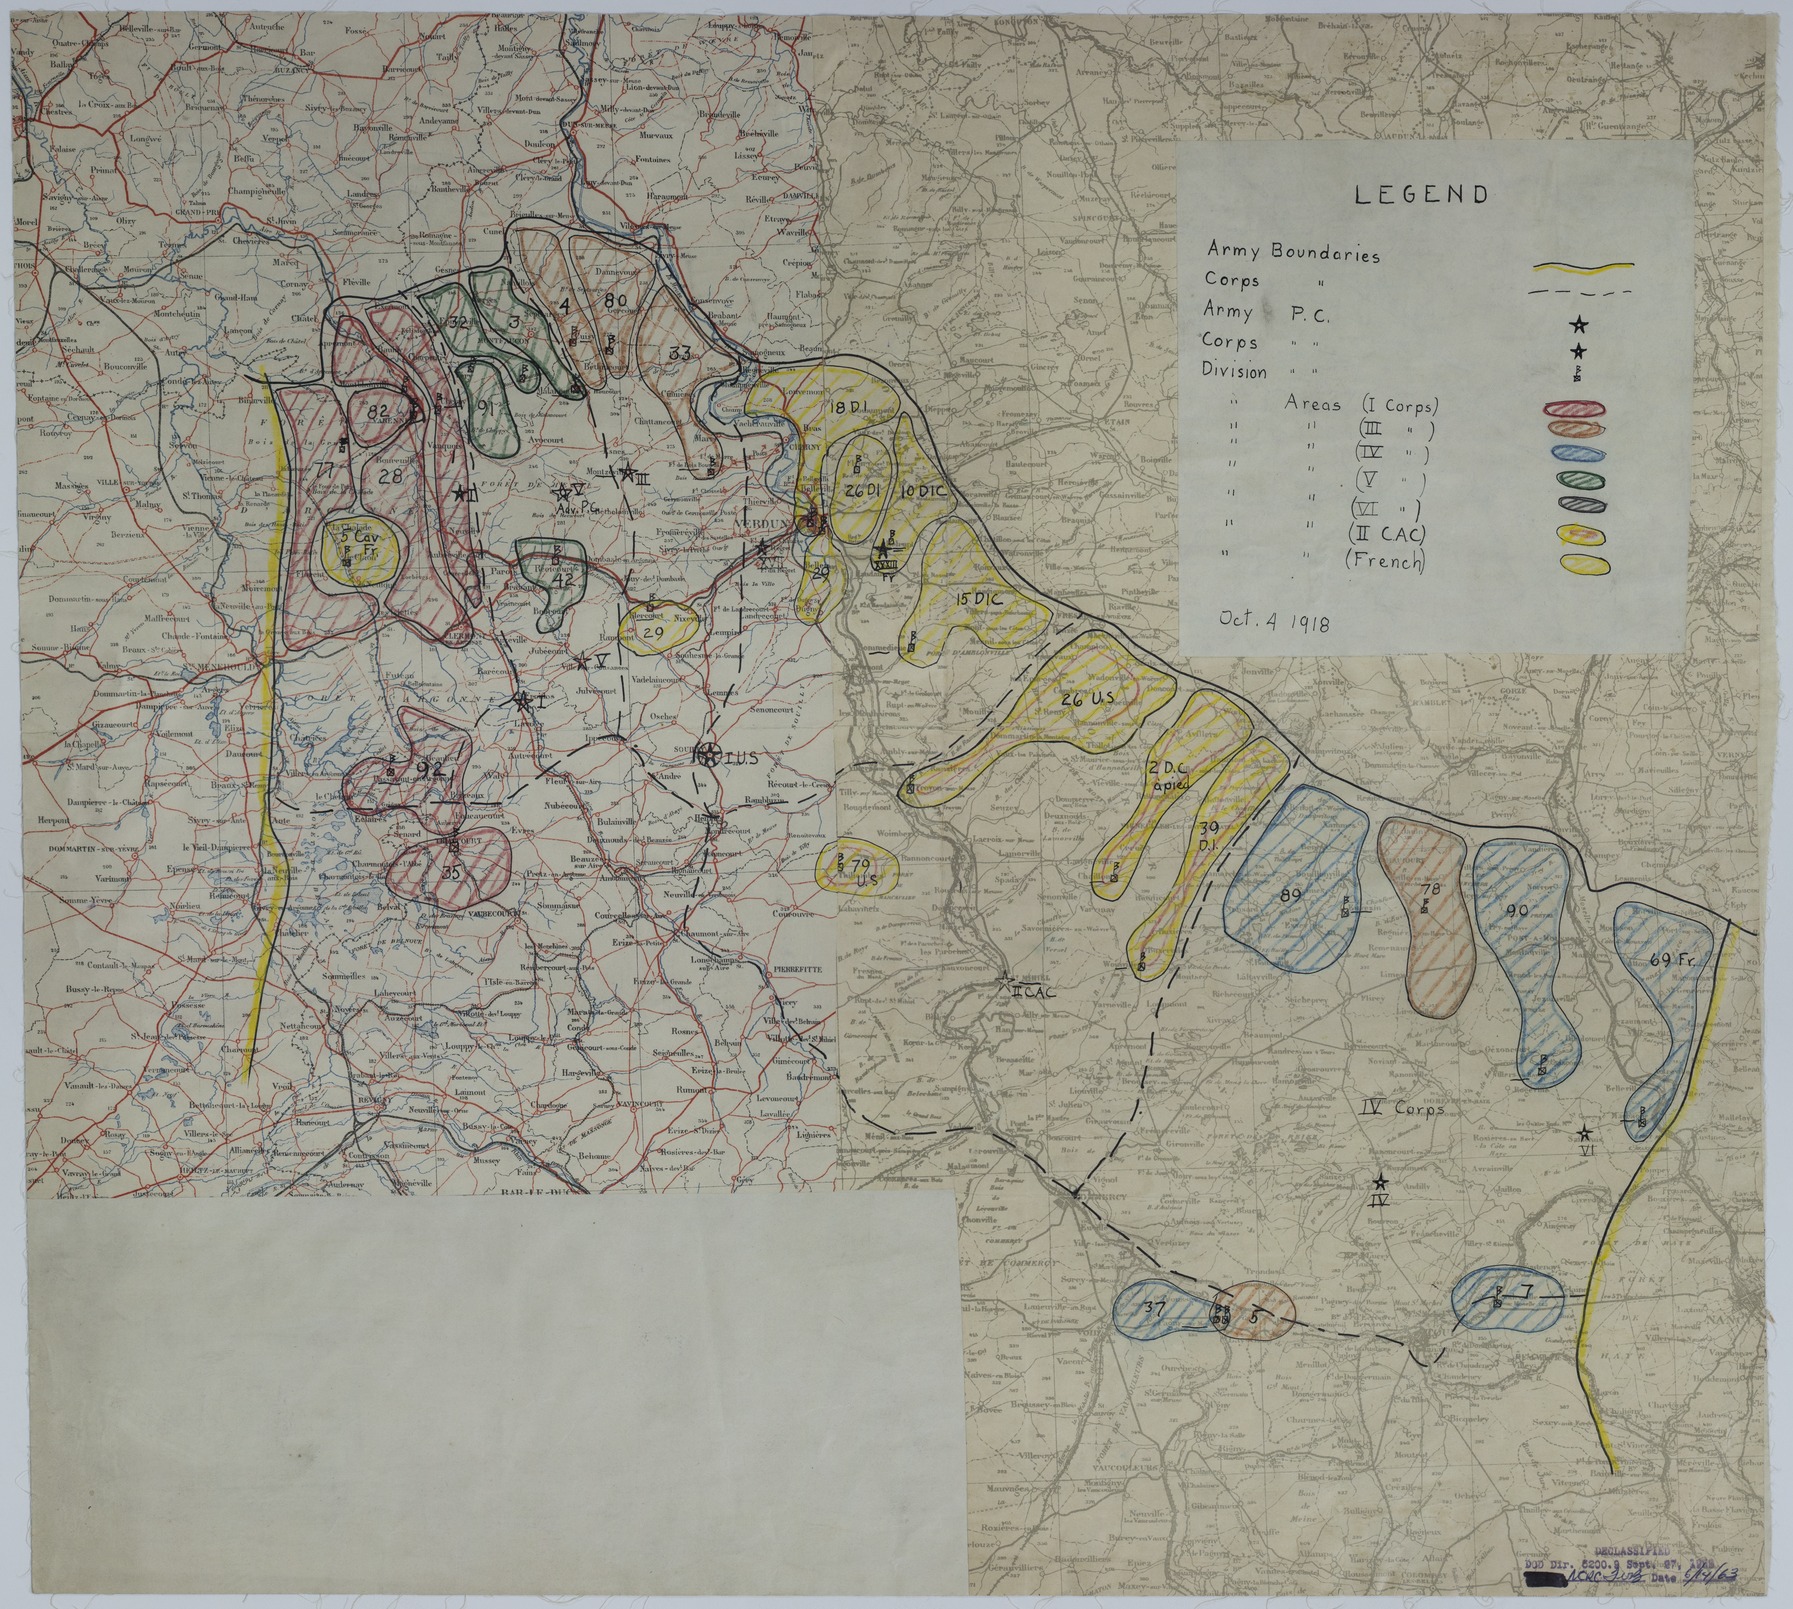 Map of Divisional Positions on October 4, 1918